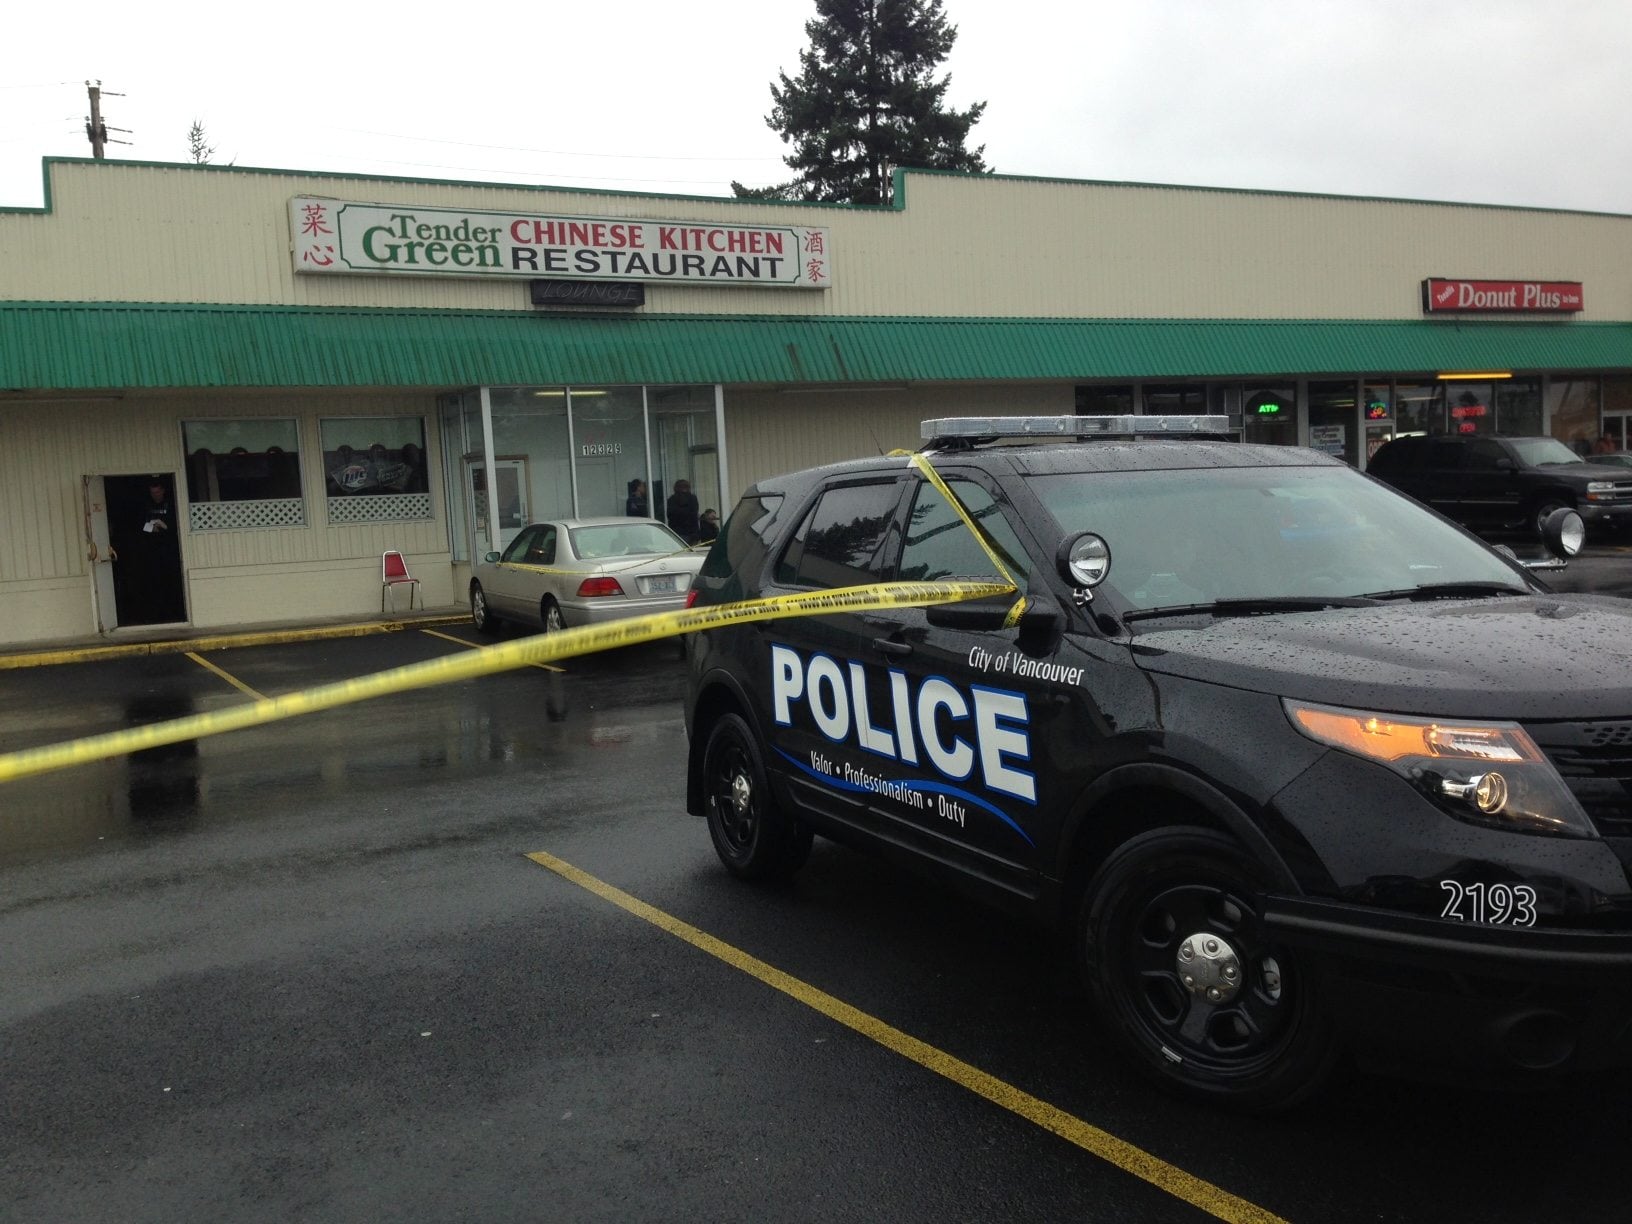 Naked Body Found At Orchards Chinese Restaurant The Columbian